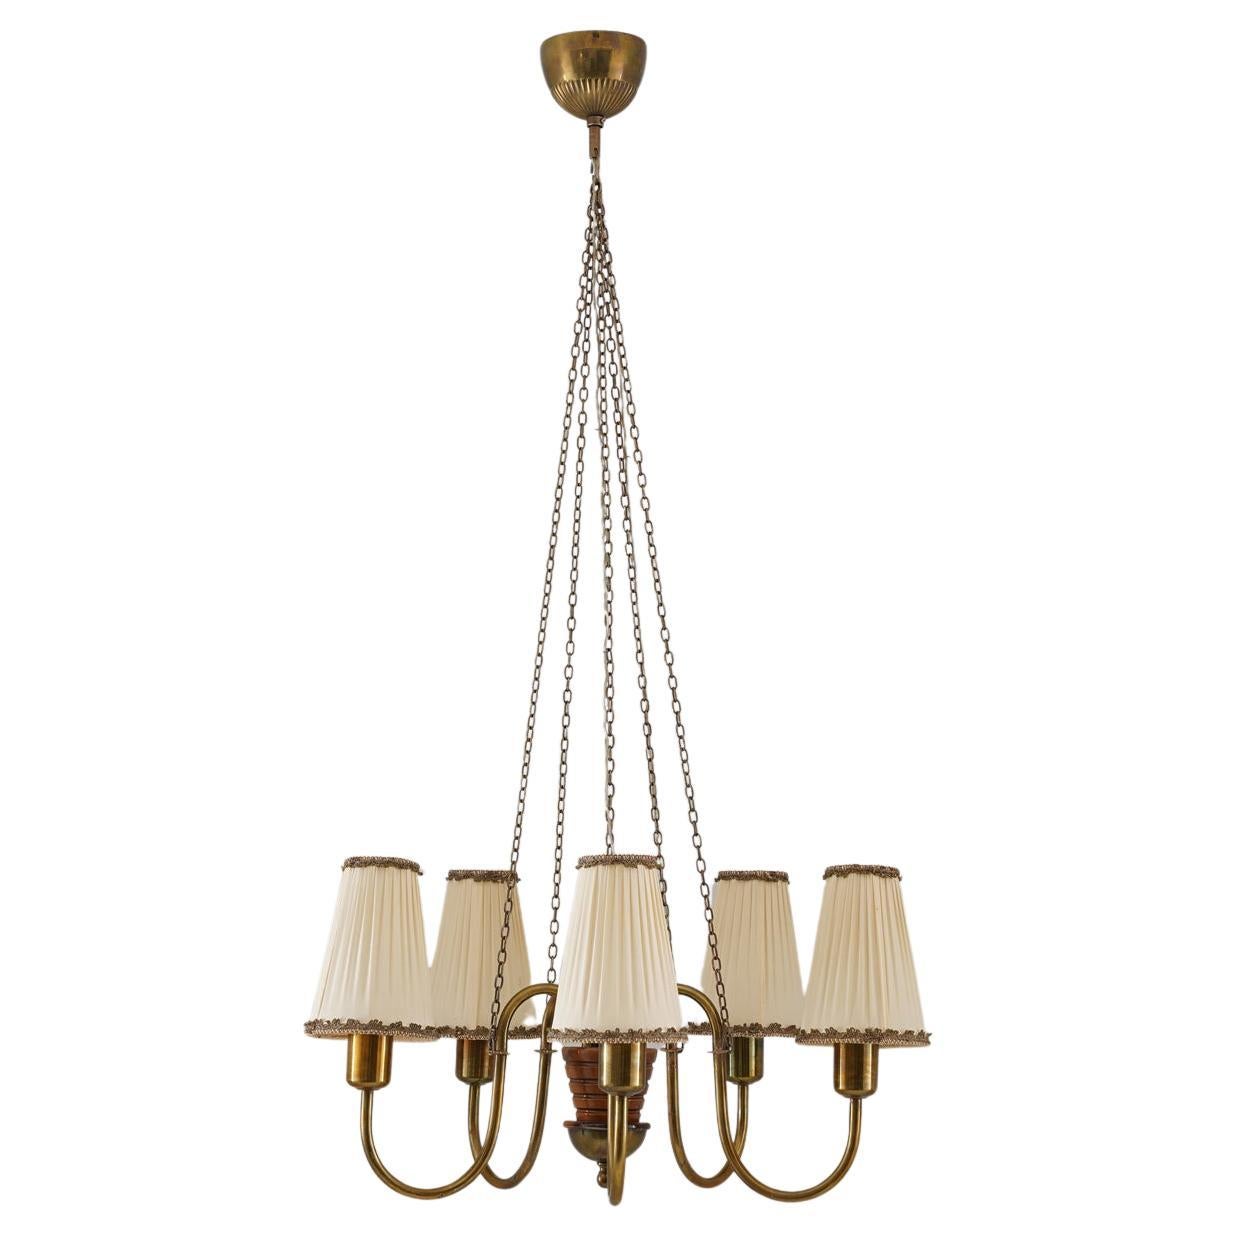 Swedish Modern Chandelier in Brass and Wood, 1940s For Sale